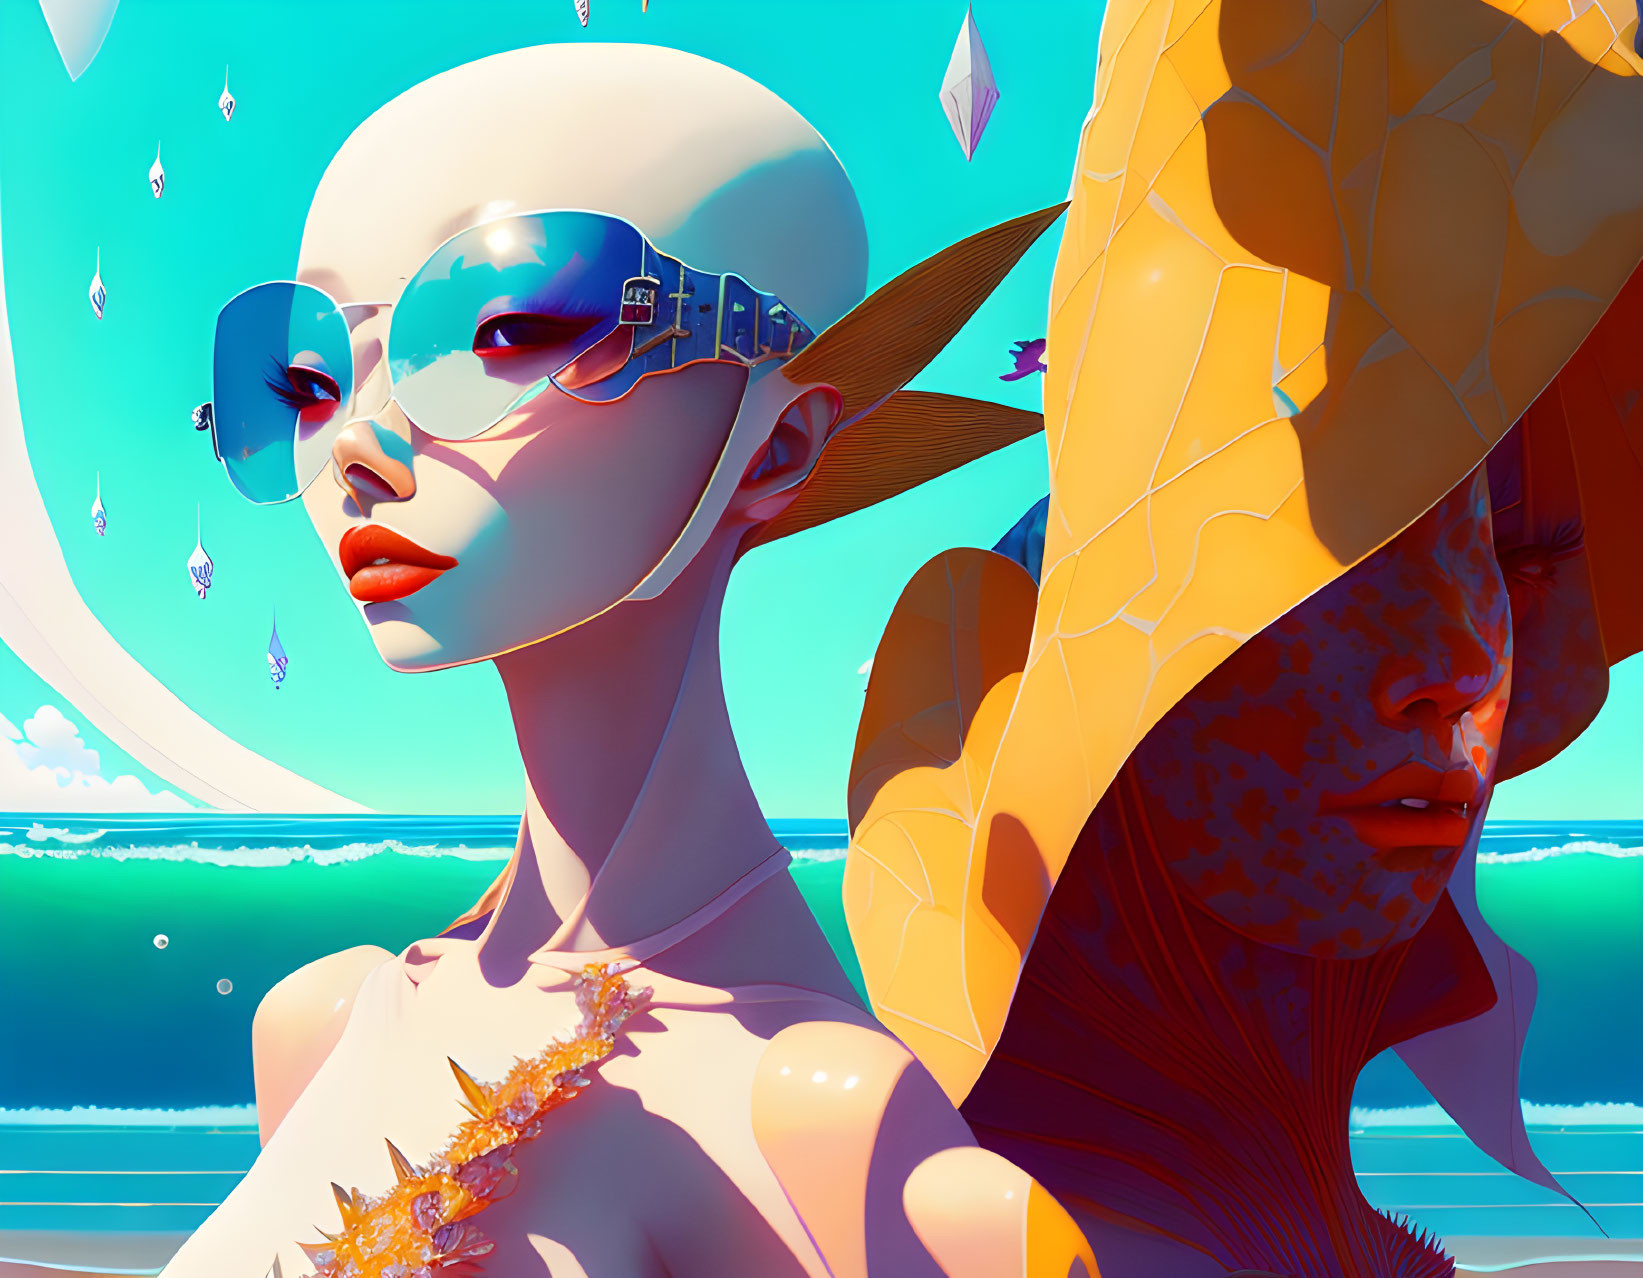 Stylized futuristic humanoid figures with sunglasses and visor by ocean with floating crystals